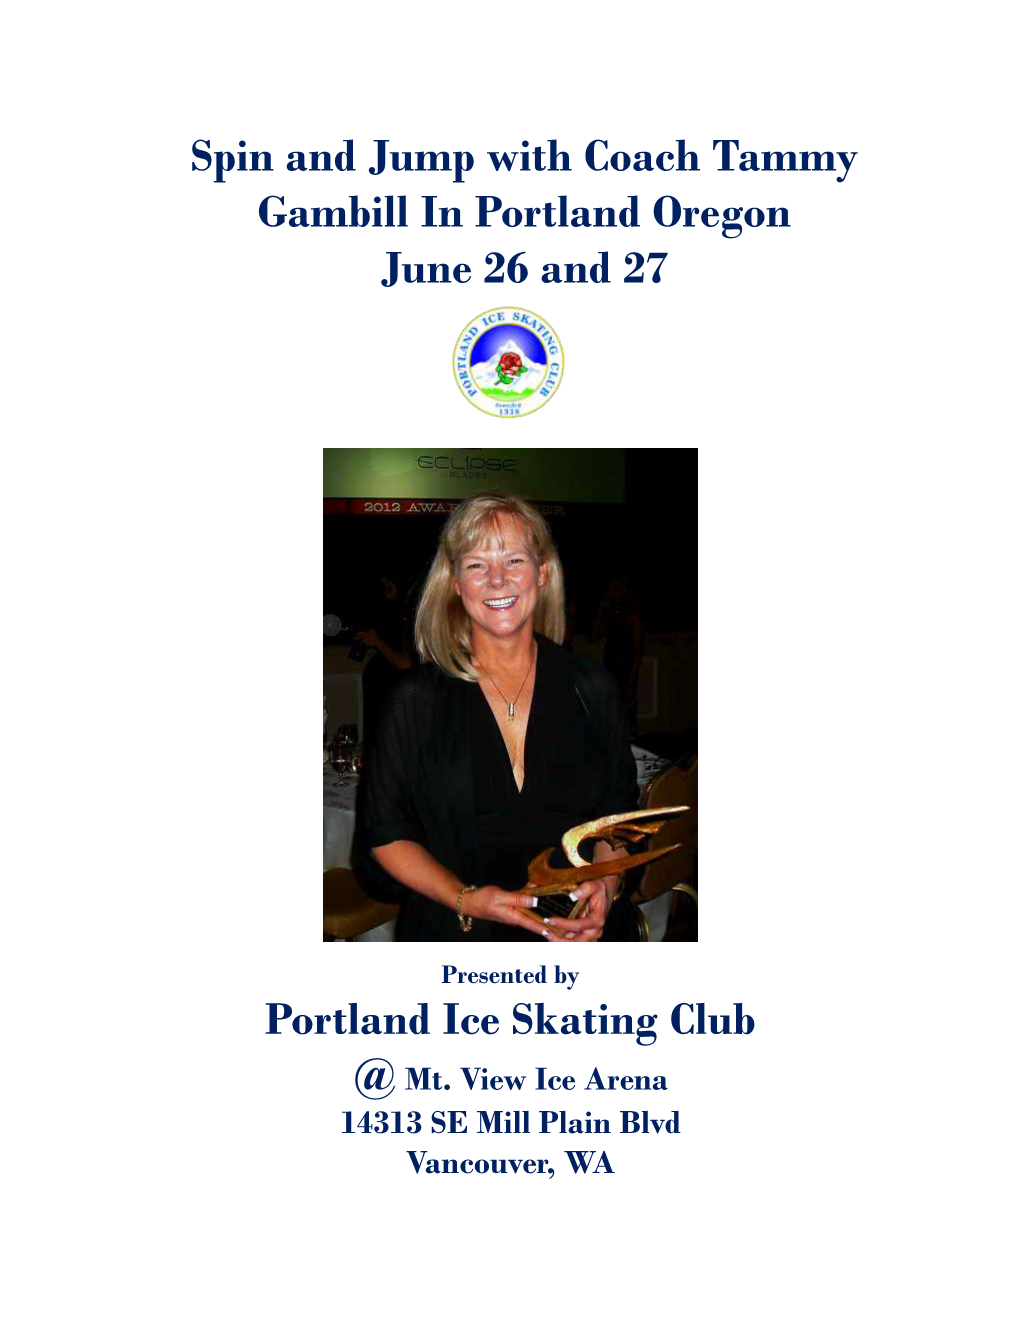 Portland Ice Skating Club Spin and Jump with Coach Tammy Gambill in Portland Oregon June 26 and 27